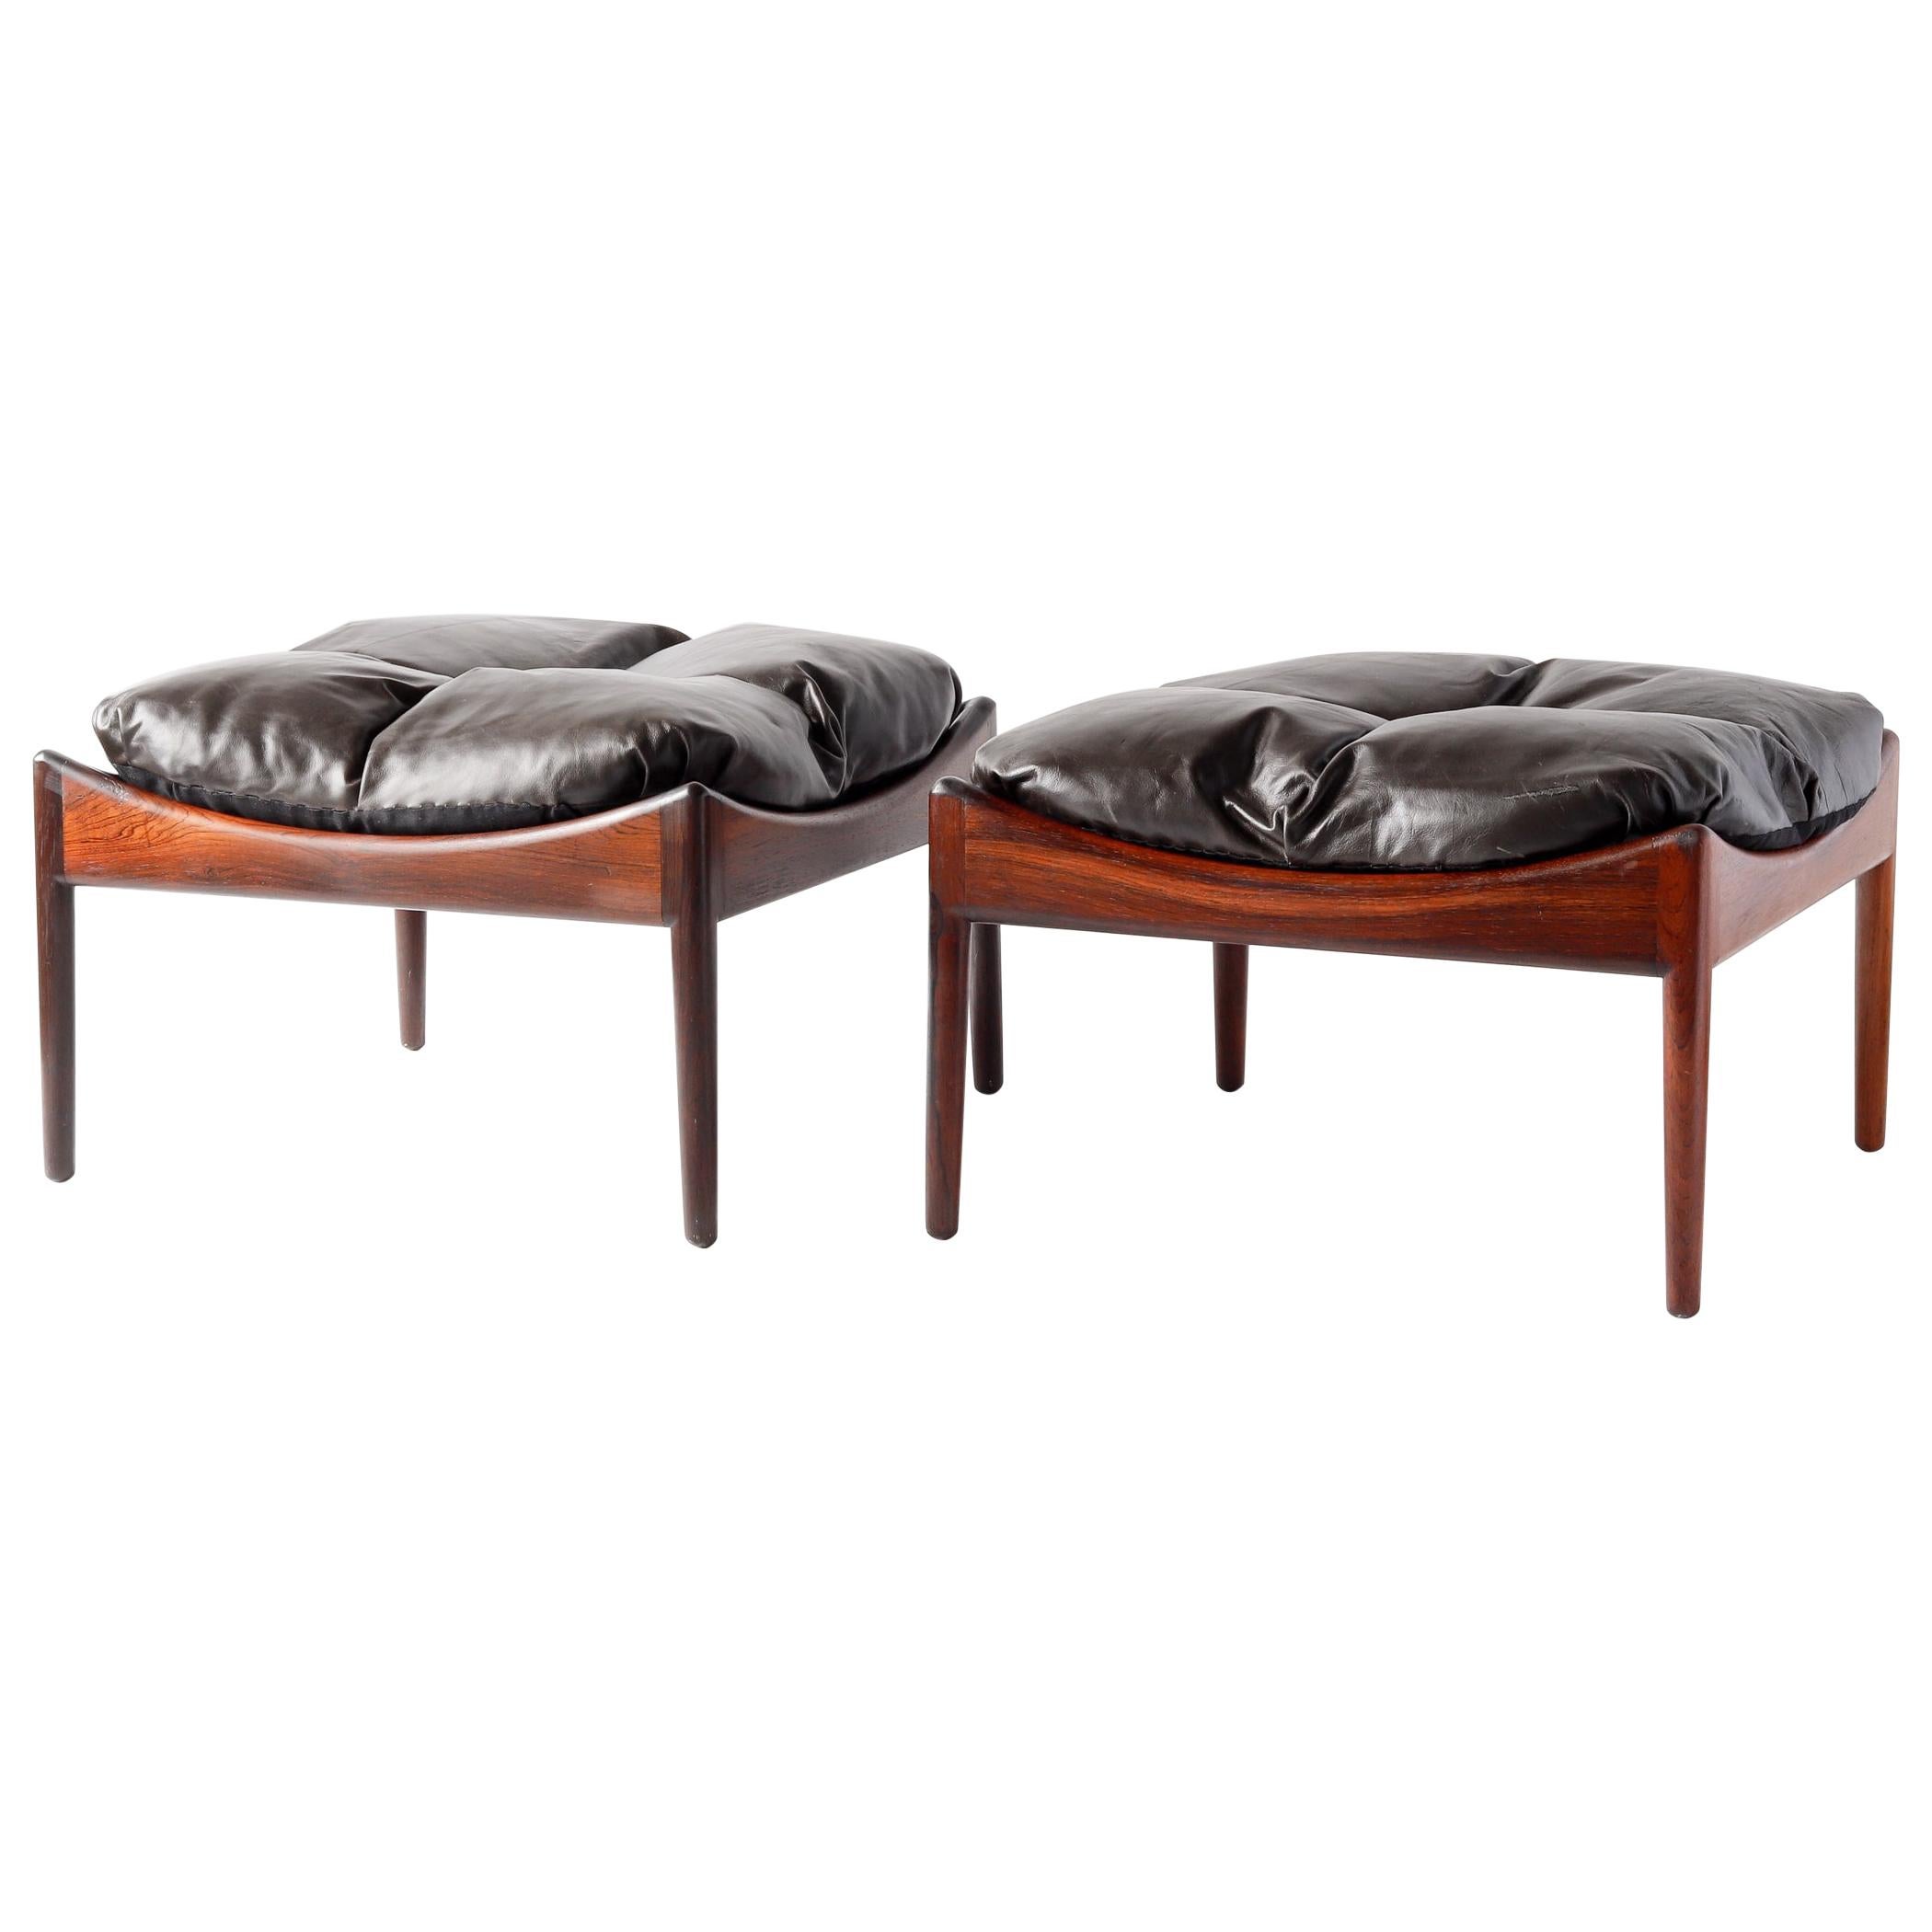 Pair of Kristian Vedel Rosewood Modus Ottomans with Brown Leather Upholstery  im Angebot